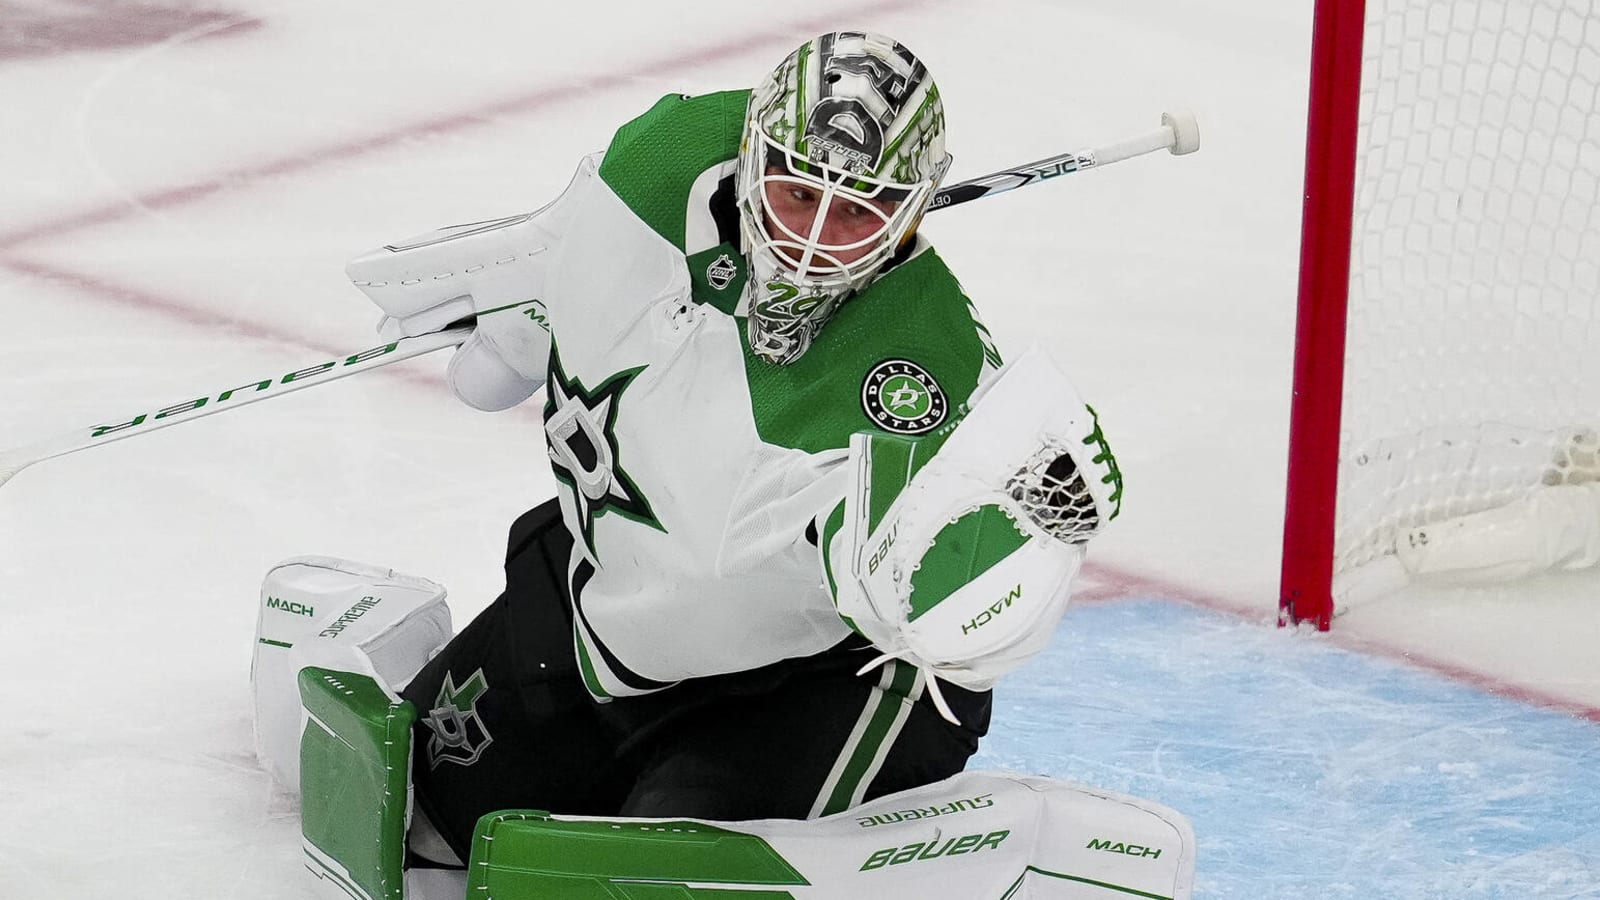 Stars need to limit mistakes to avoid major series deficit